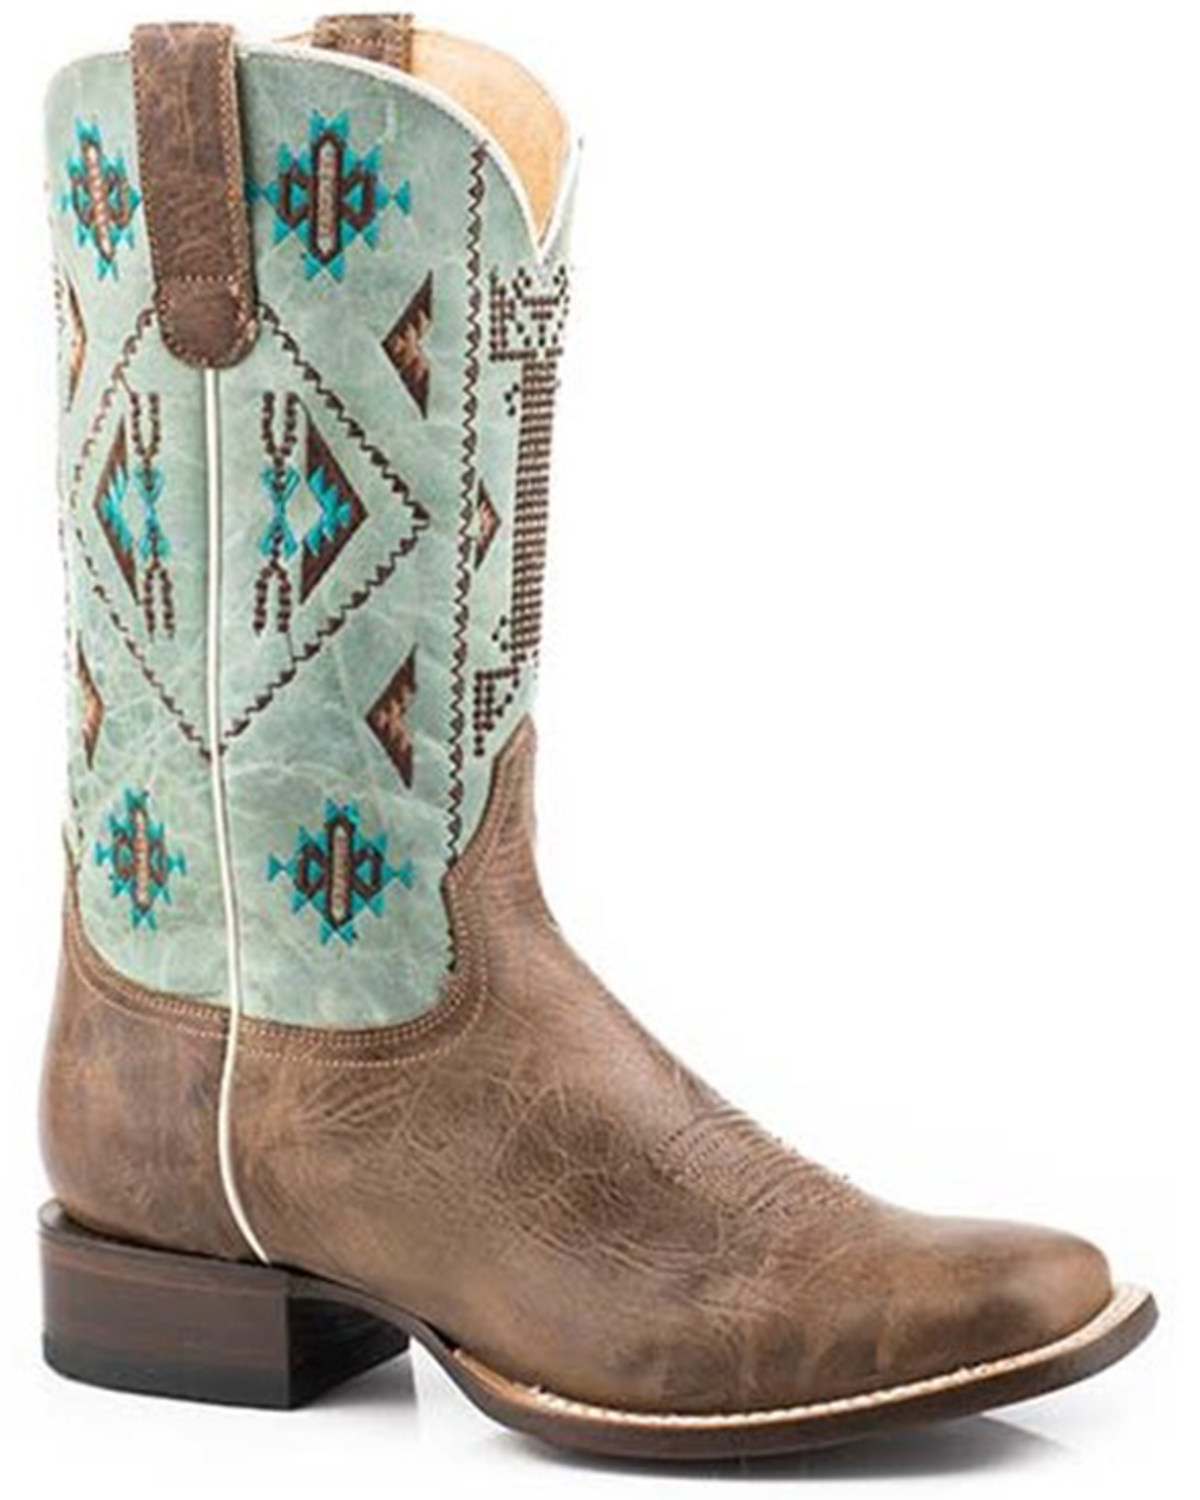 Roper Women's Out West Southwestern Embroidered Performance Western Boots - Square Toe